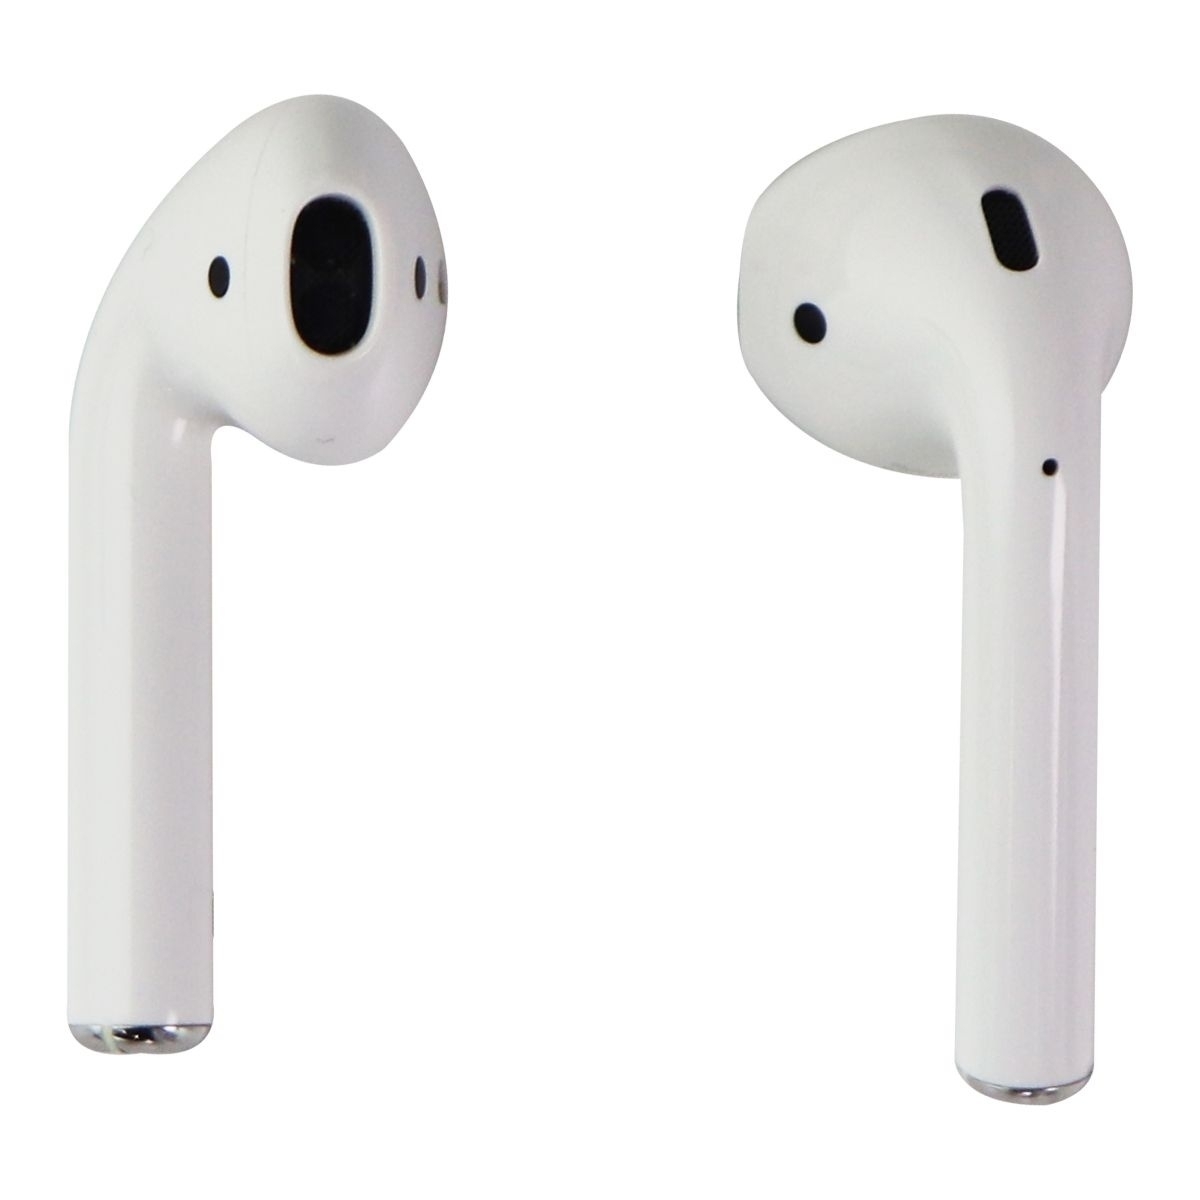 Apple AirPods with Wireless Charging Case - image 3 of 3